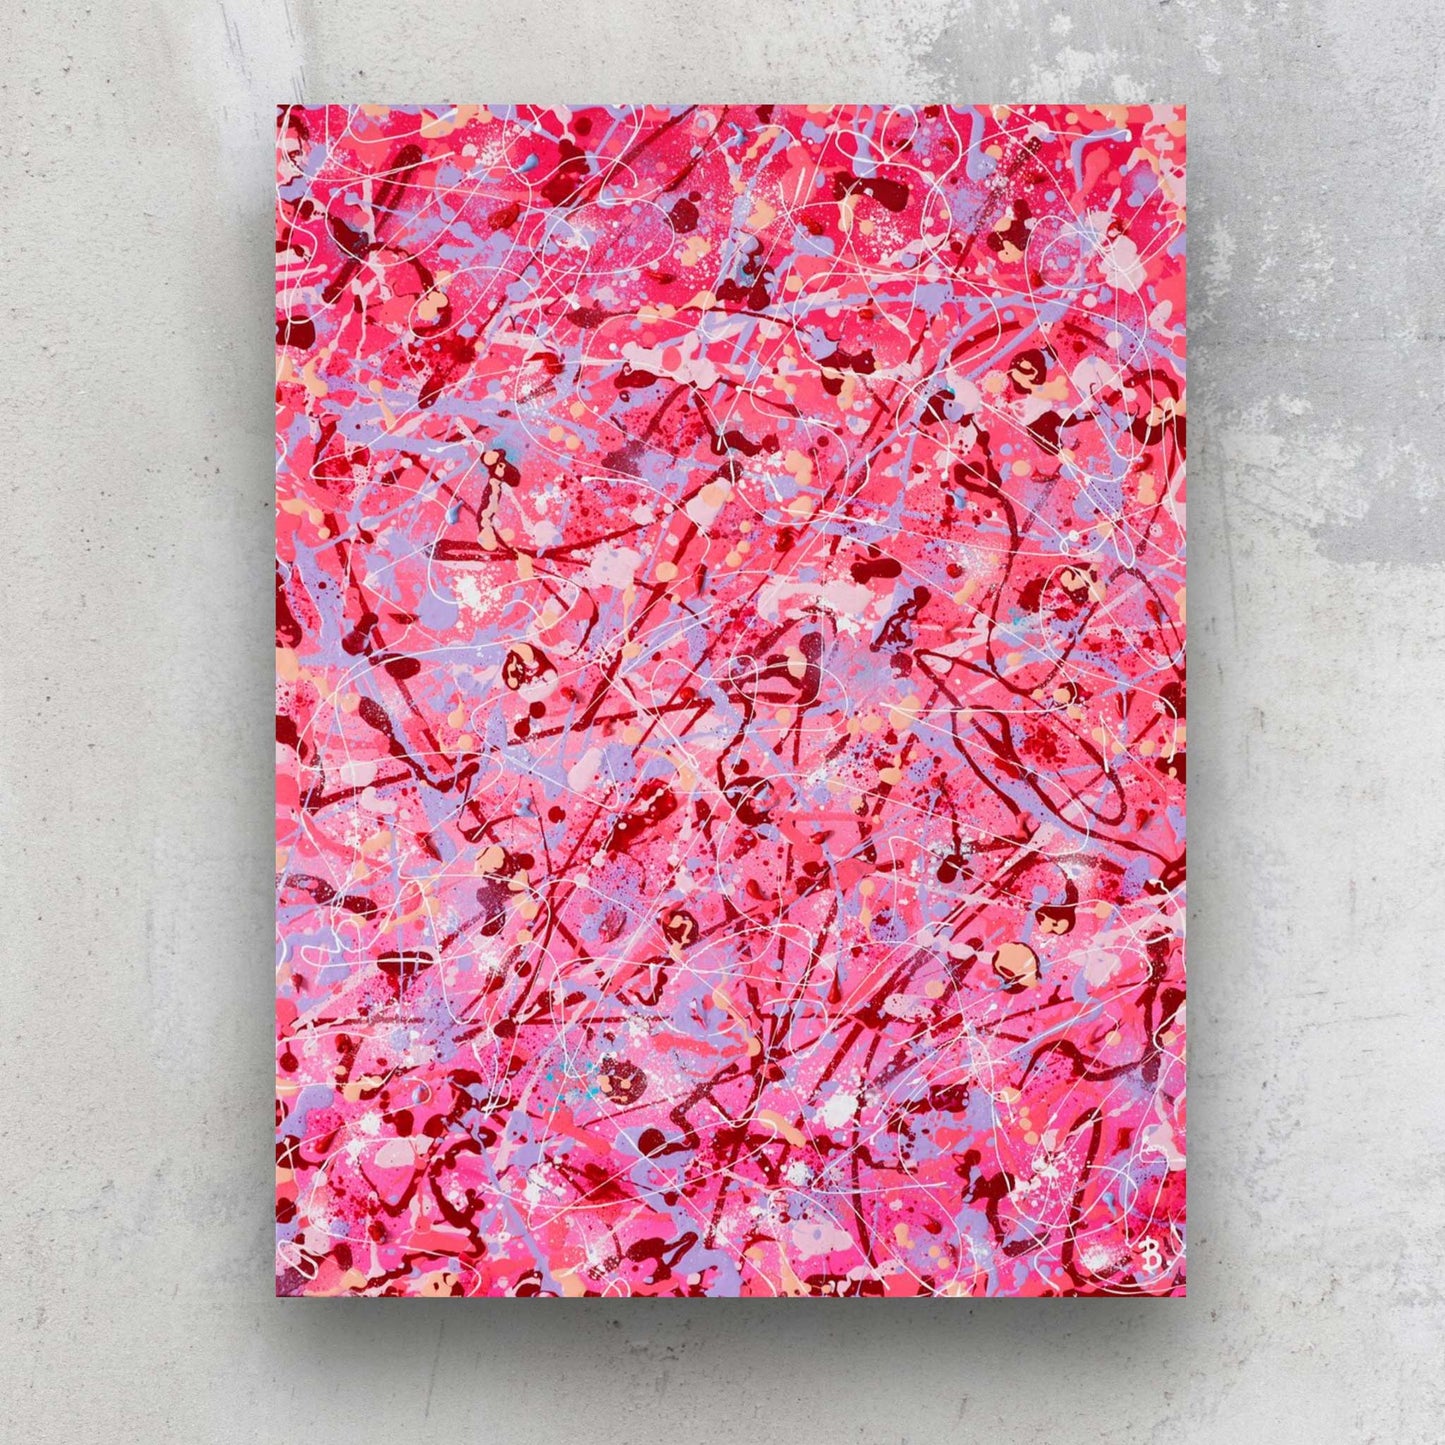 Self Love, large, acrylic, abstract painting in bright pinks, reds, pastel peach, mauve and whites. 120h x 76 w cms. Painted by Bridget Bradley, contemporary Abstract Artist